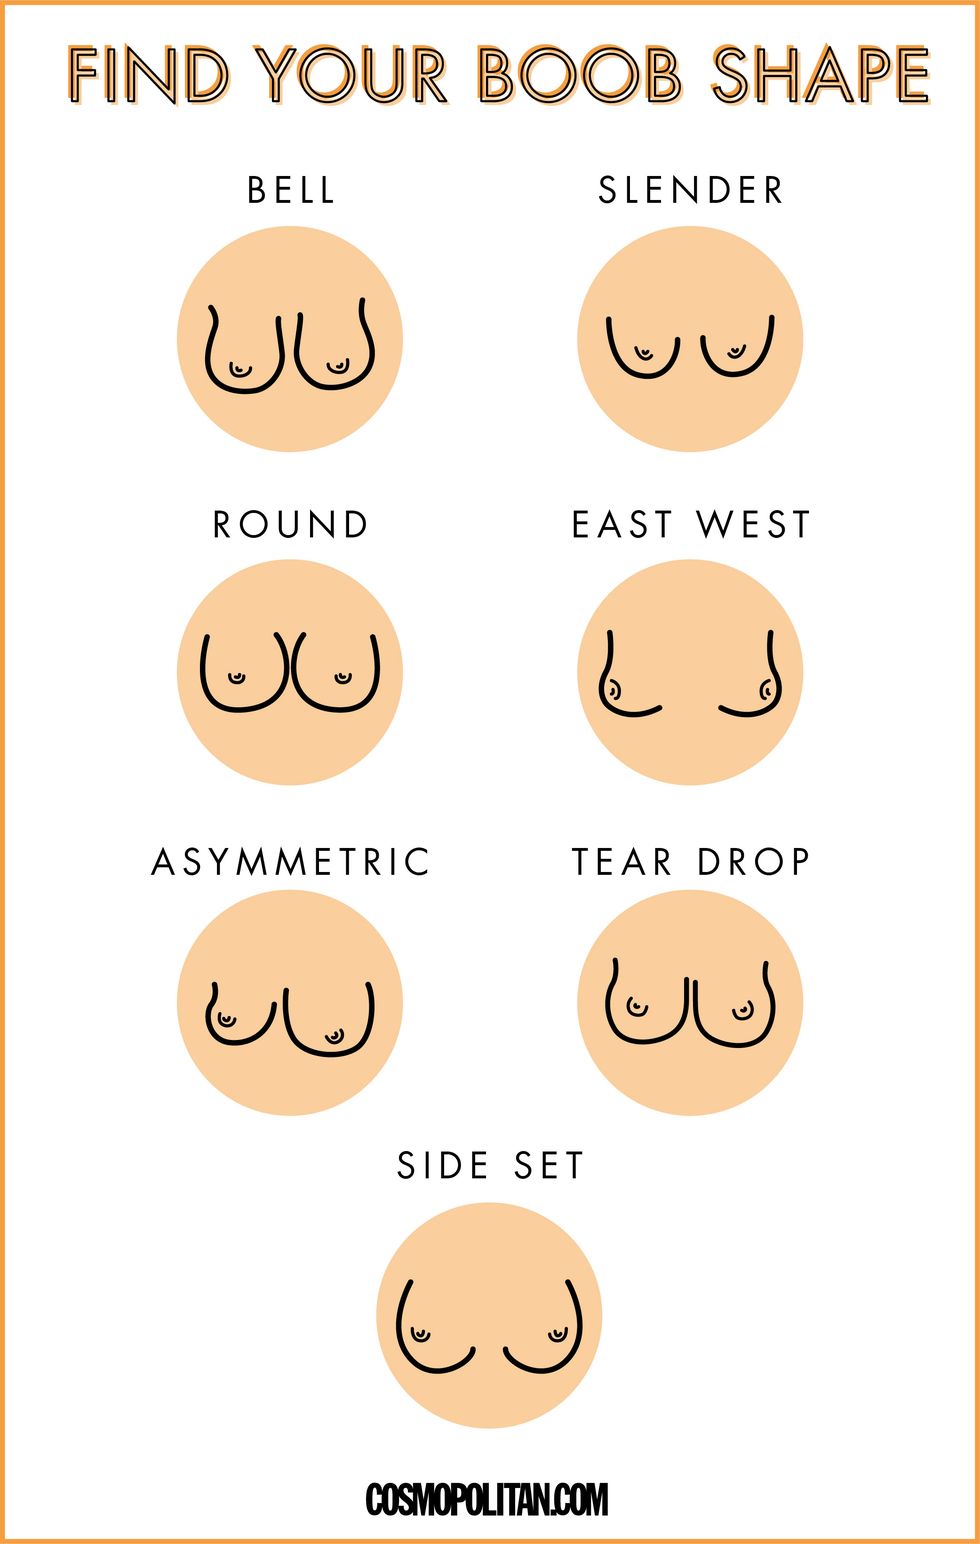 How To Find The Right Bra Size & How To Tell Your Bra Fits